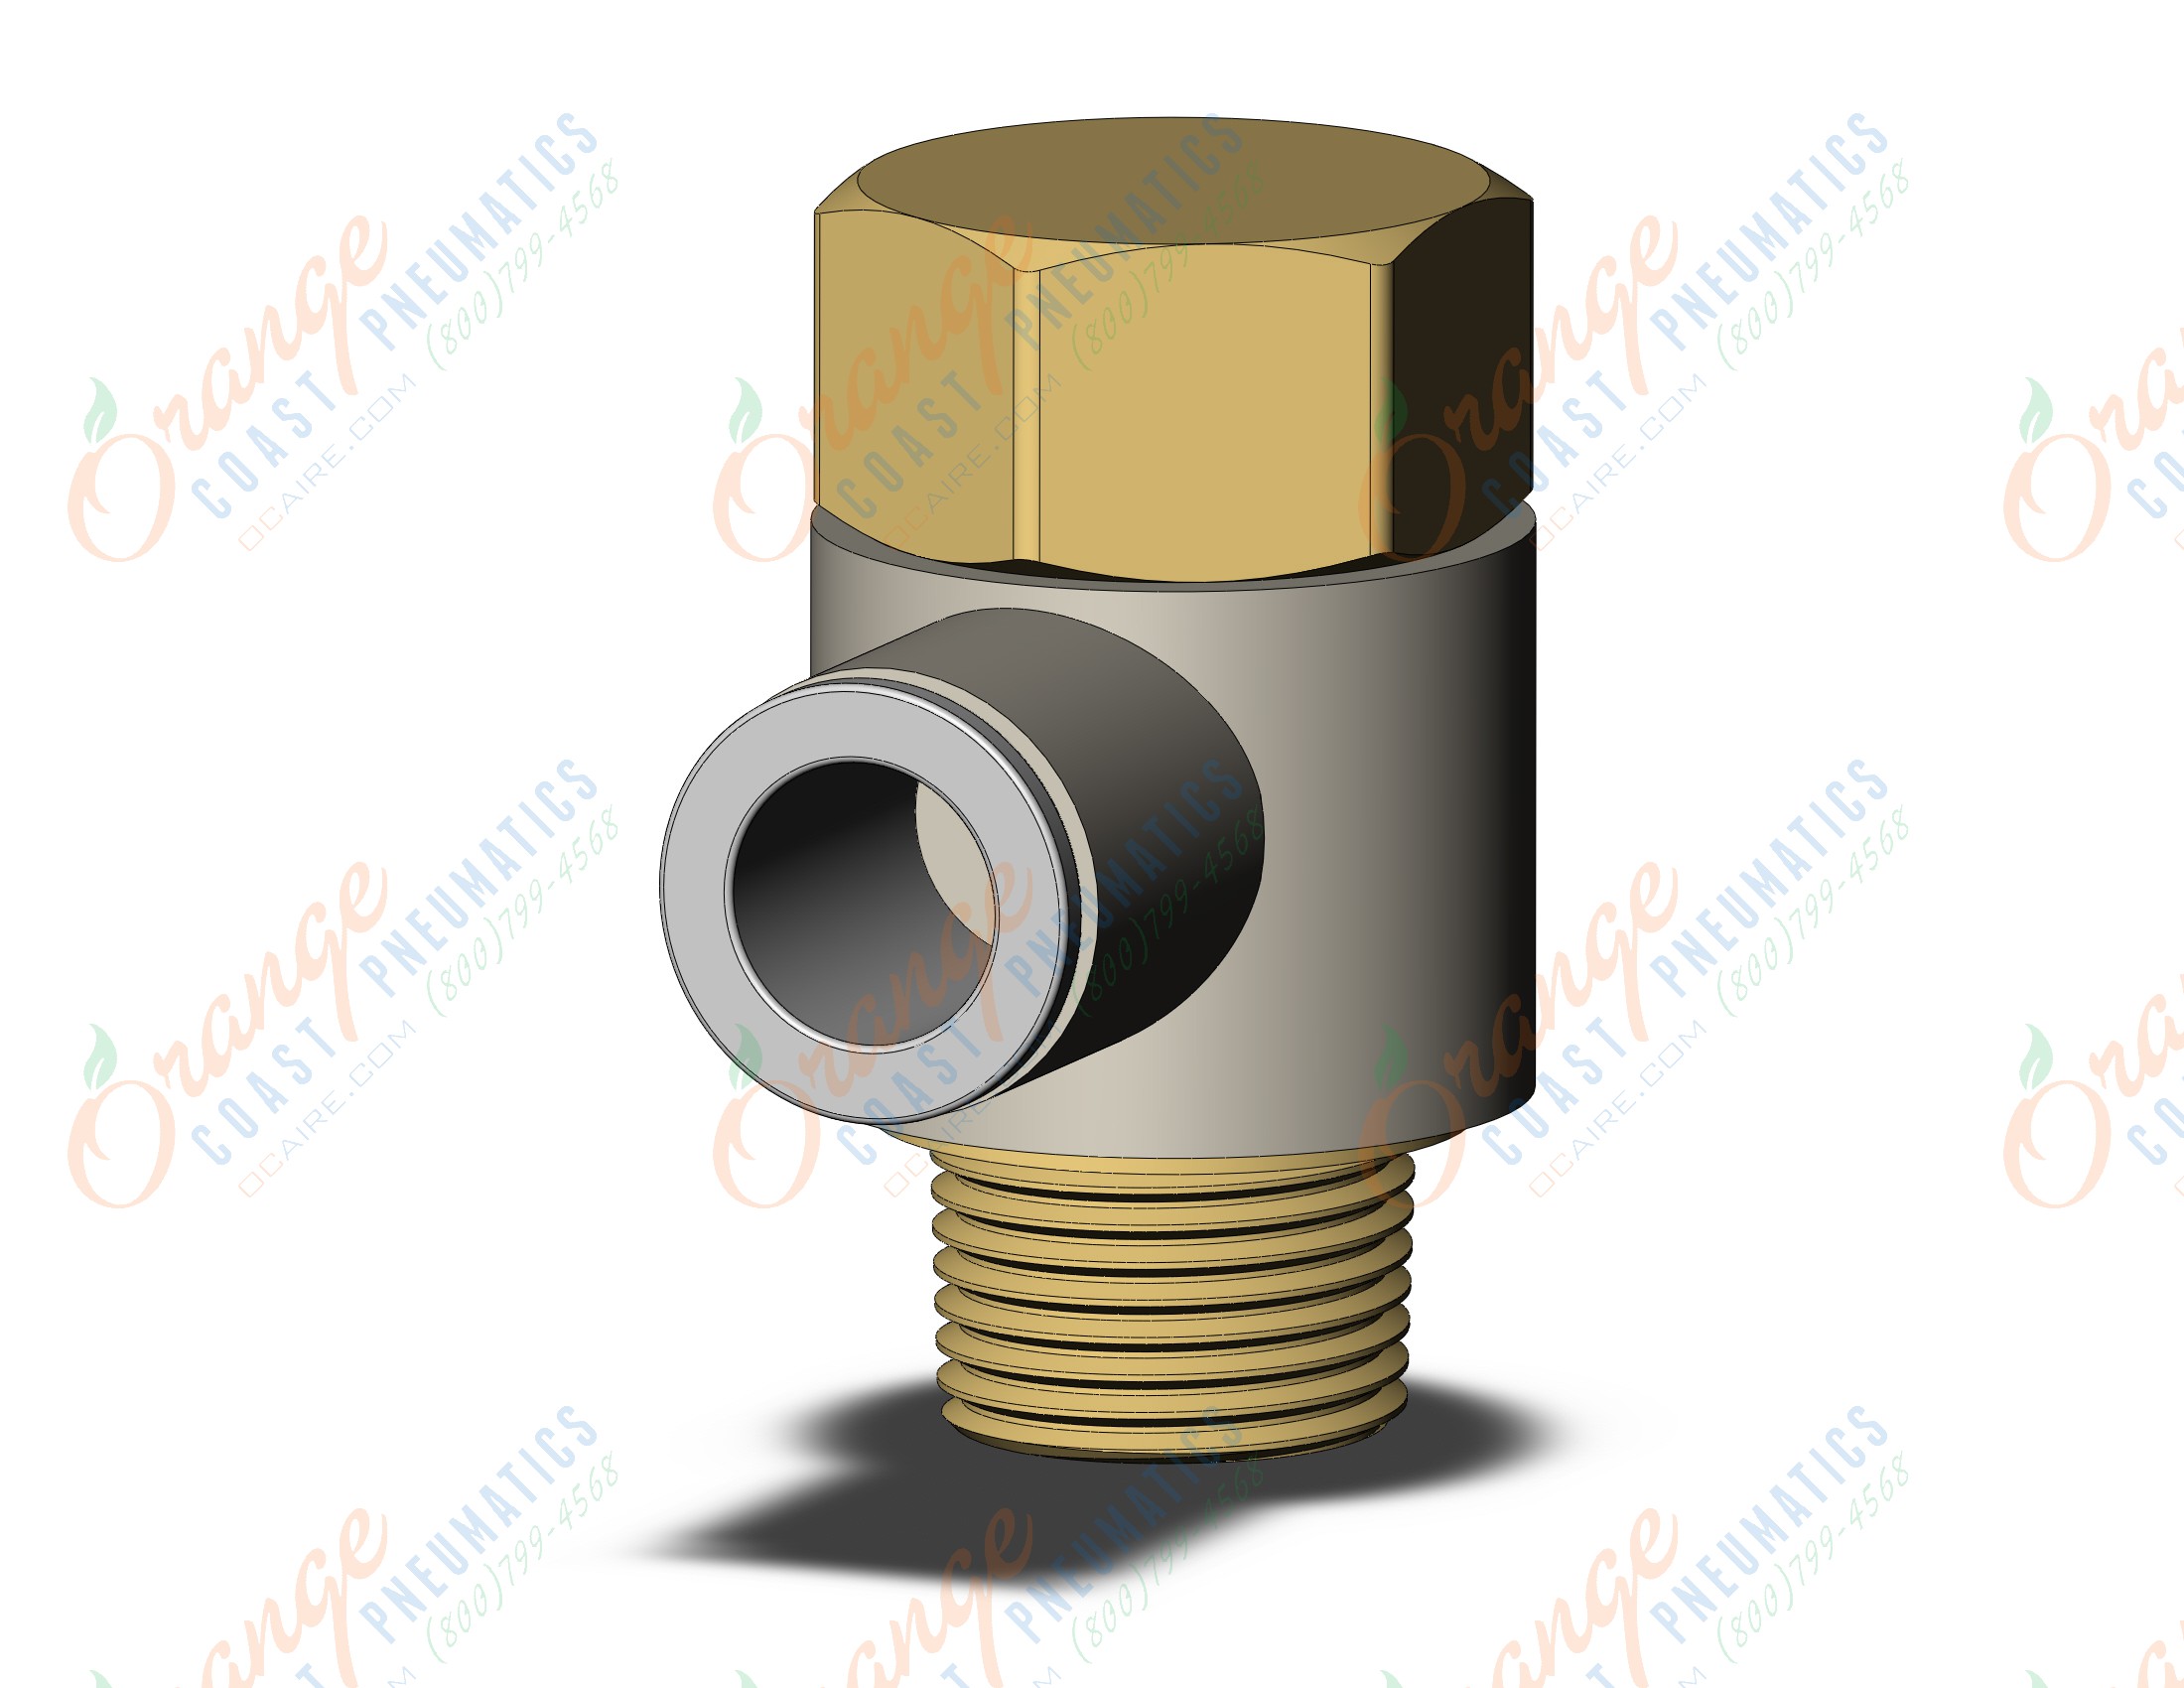 SMC KQ2VF10-03A fitting, uni female elbow, KQ2 FITTING (sold in packages of 10; price is per piece)